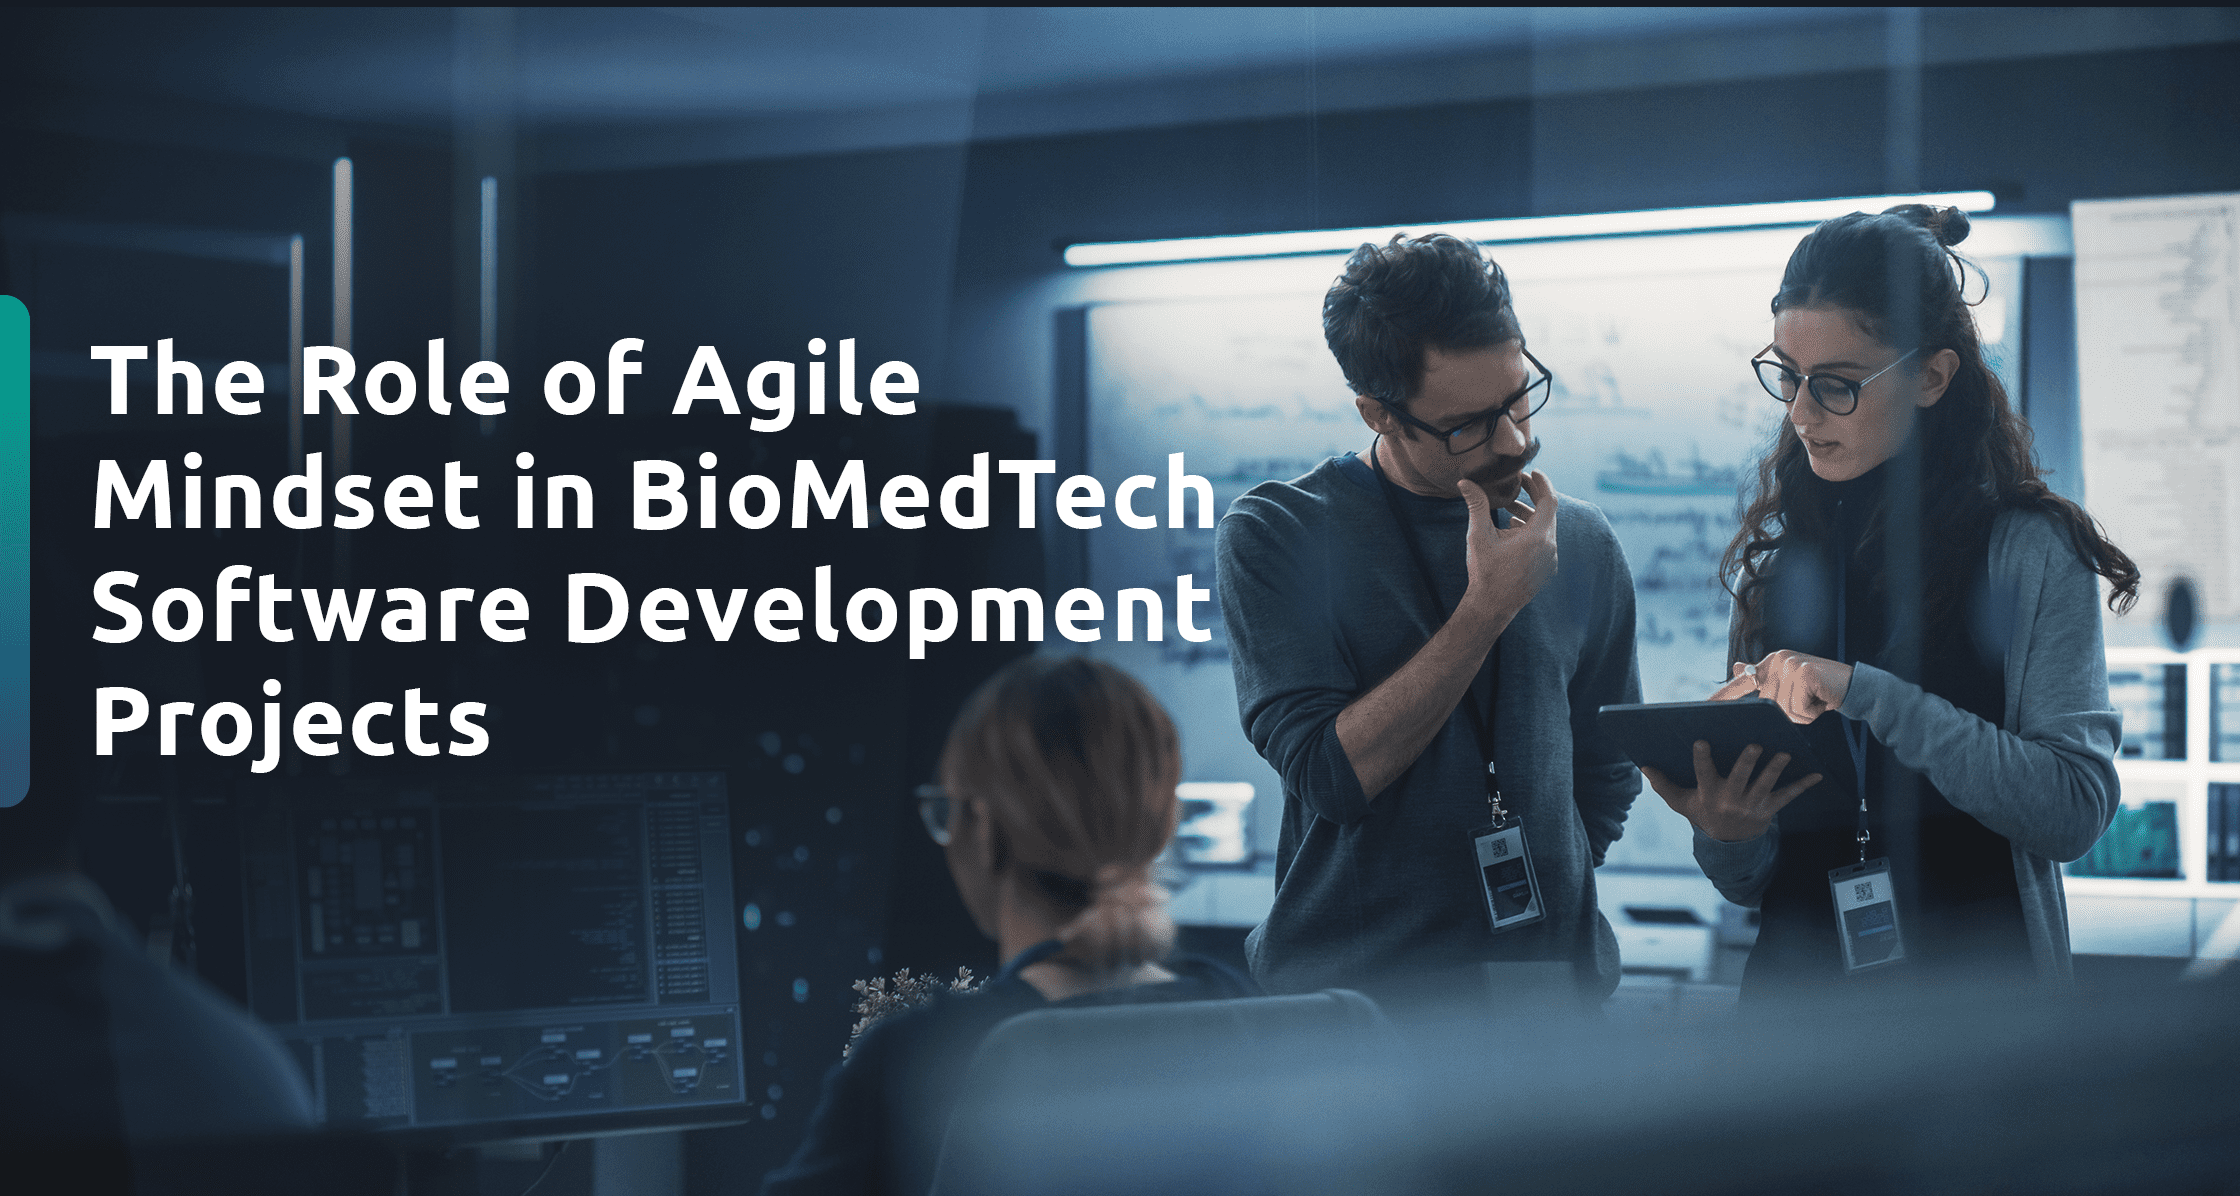 The Role of Agile Mindset in BioMedTech Software Development Projects